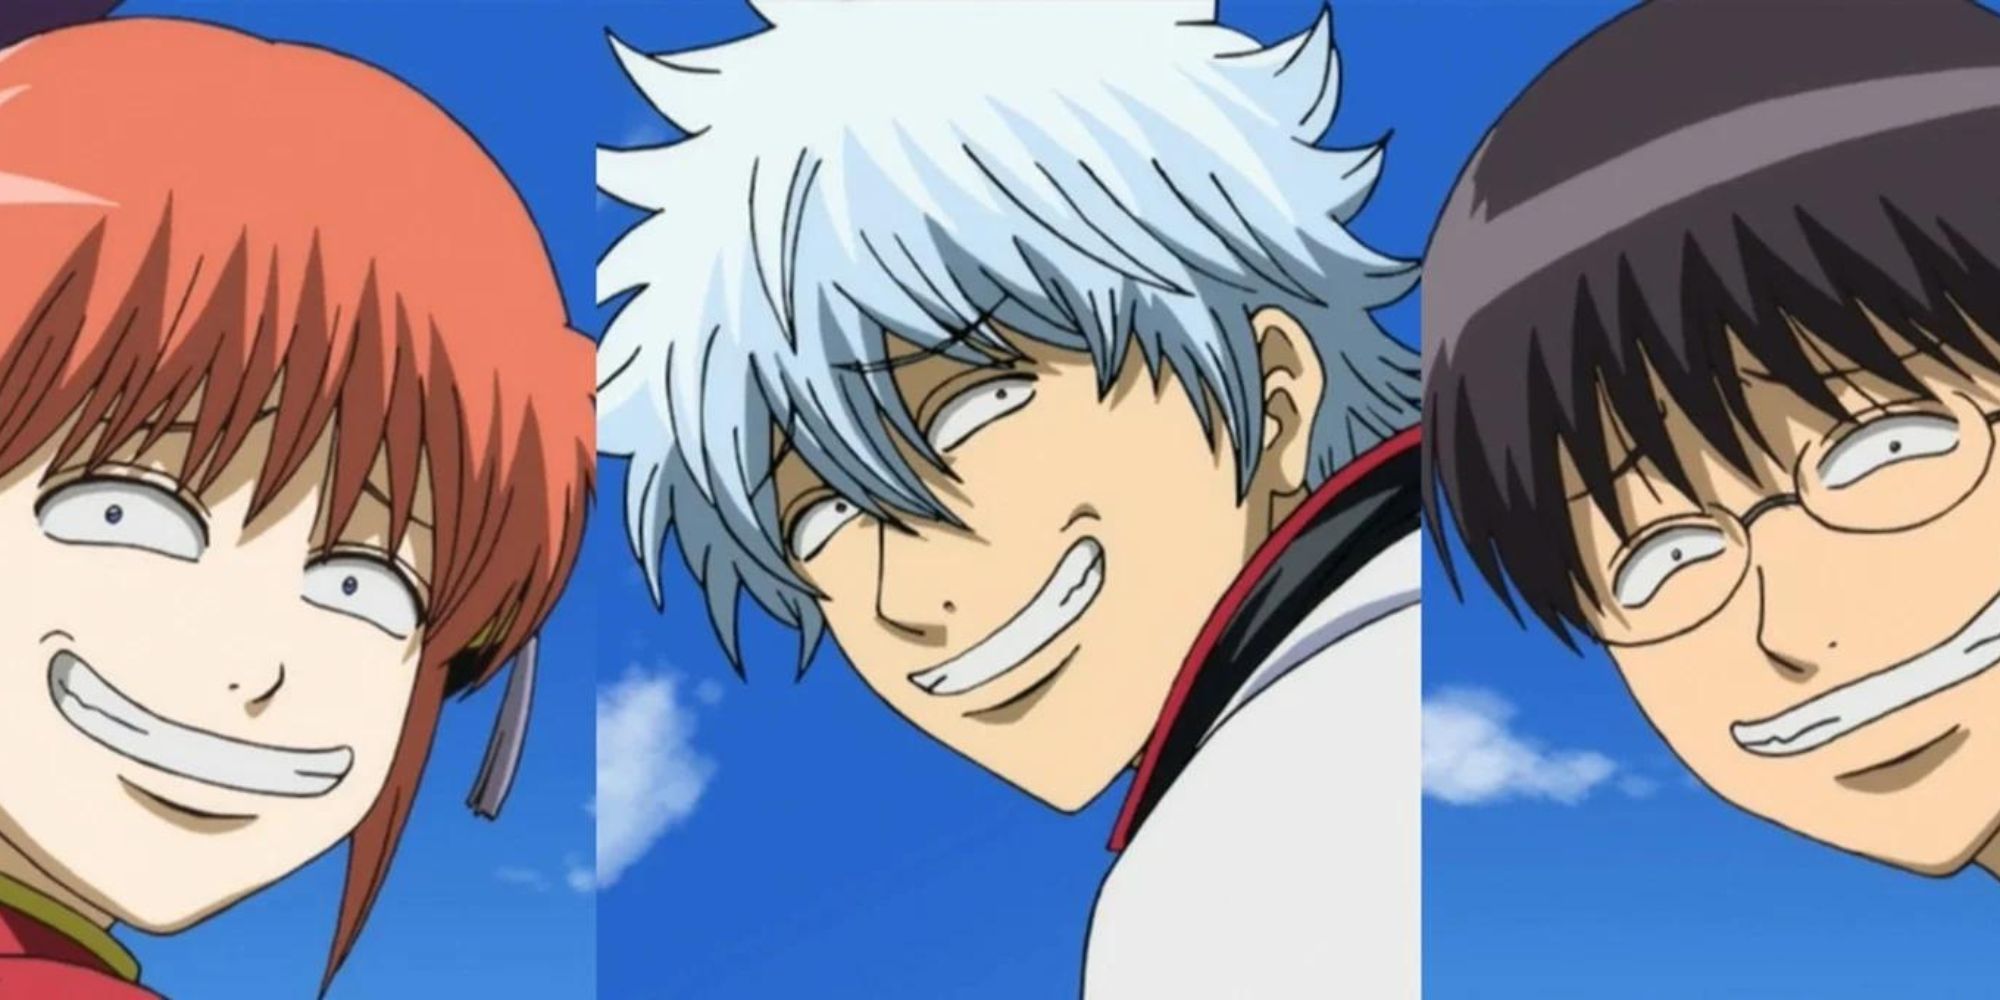 10 of the Funniest Anime Shows: From 'Nichijou' To 'Gintama'